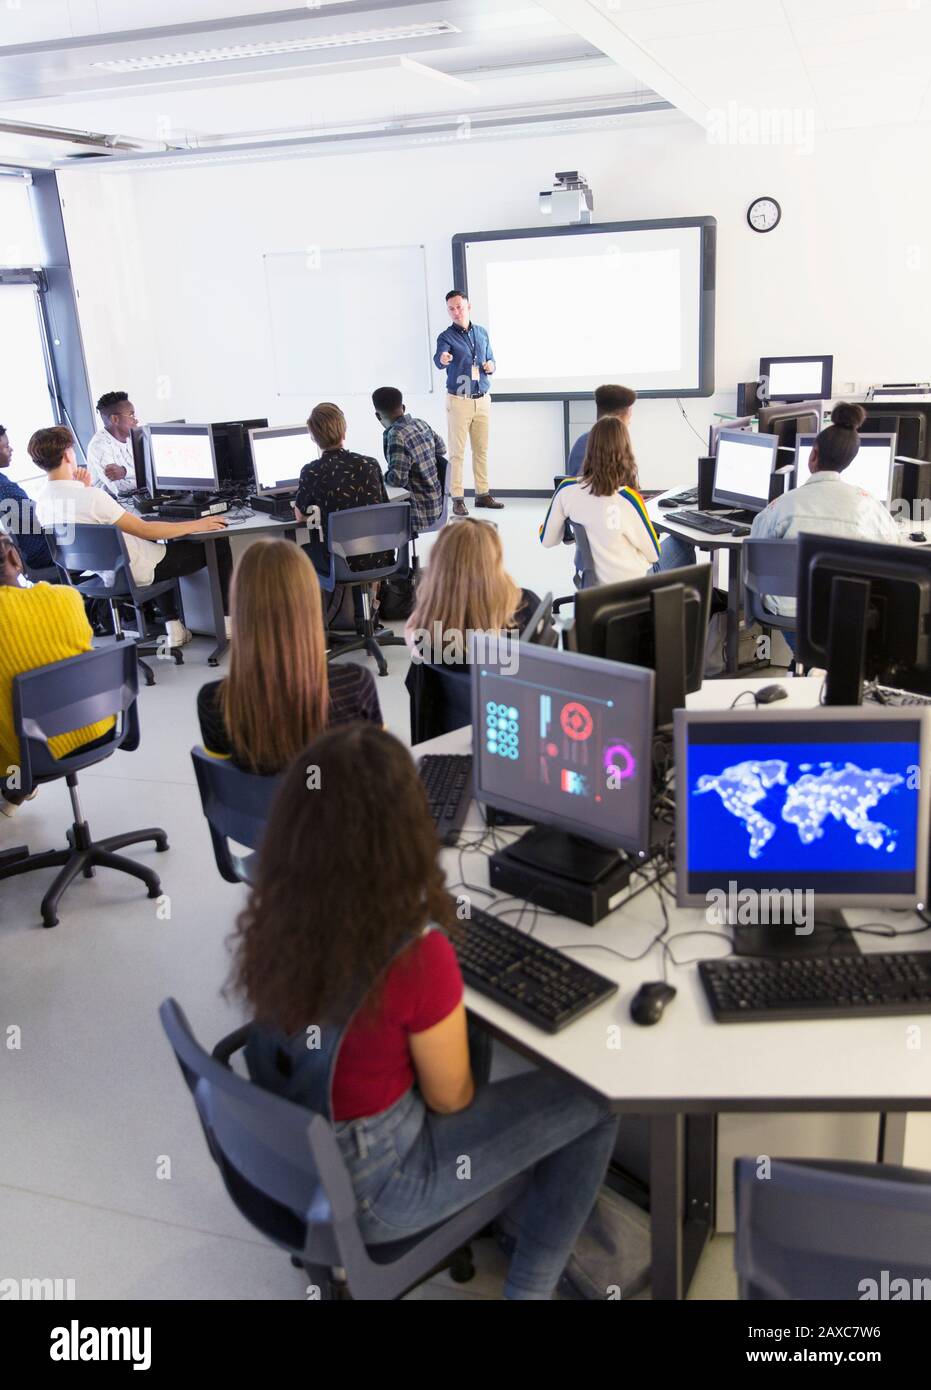 Junior high students at computers listening to teacher at projection screen in classroom Stock Photo